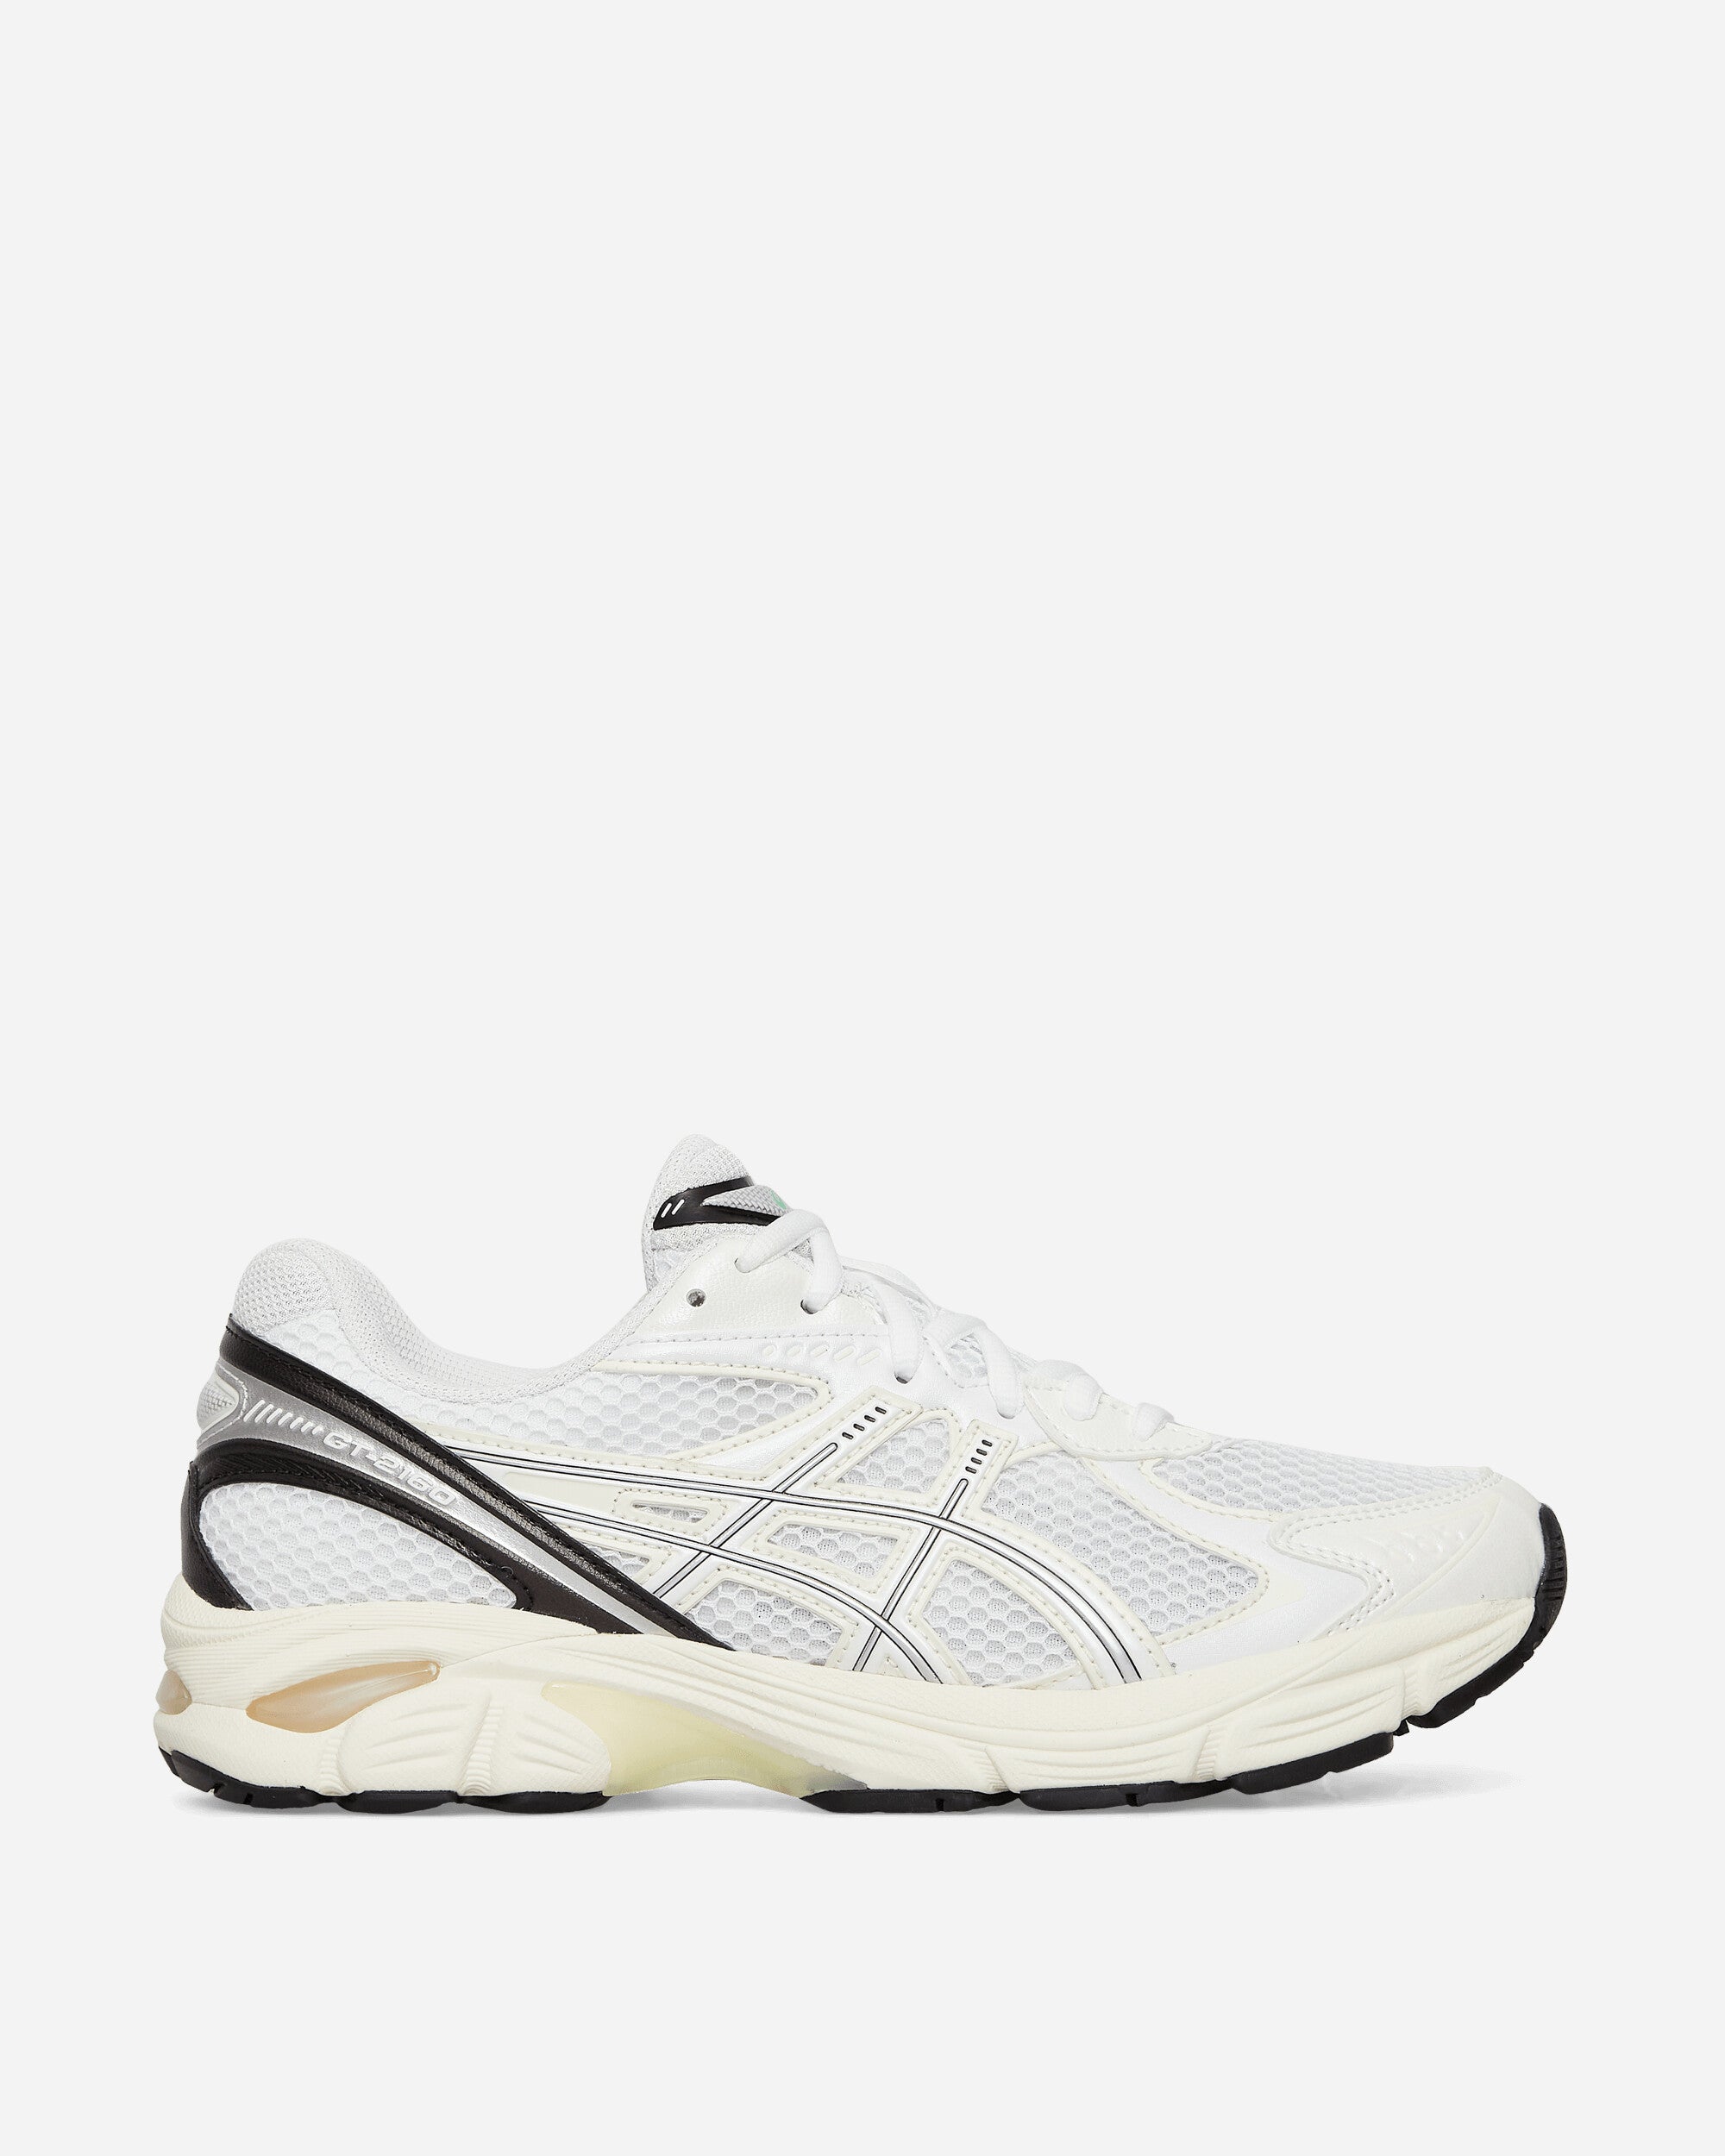 Asics Gt-2160 White/Black Sneakers Low 1203A275-104